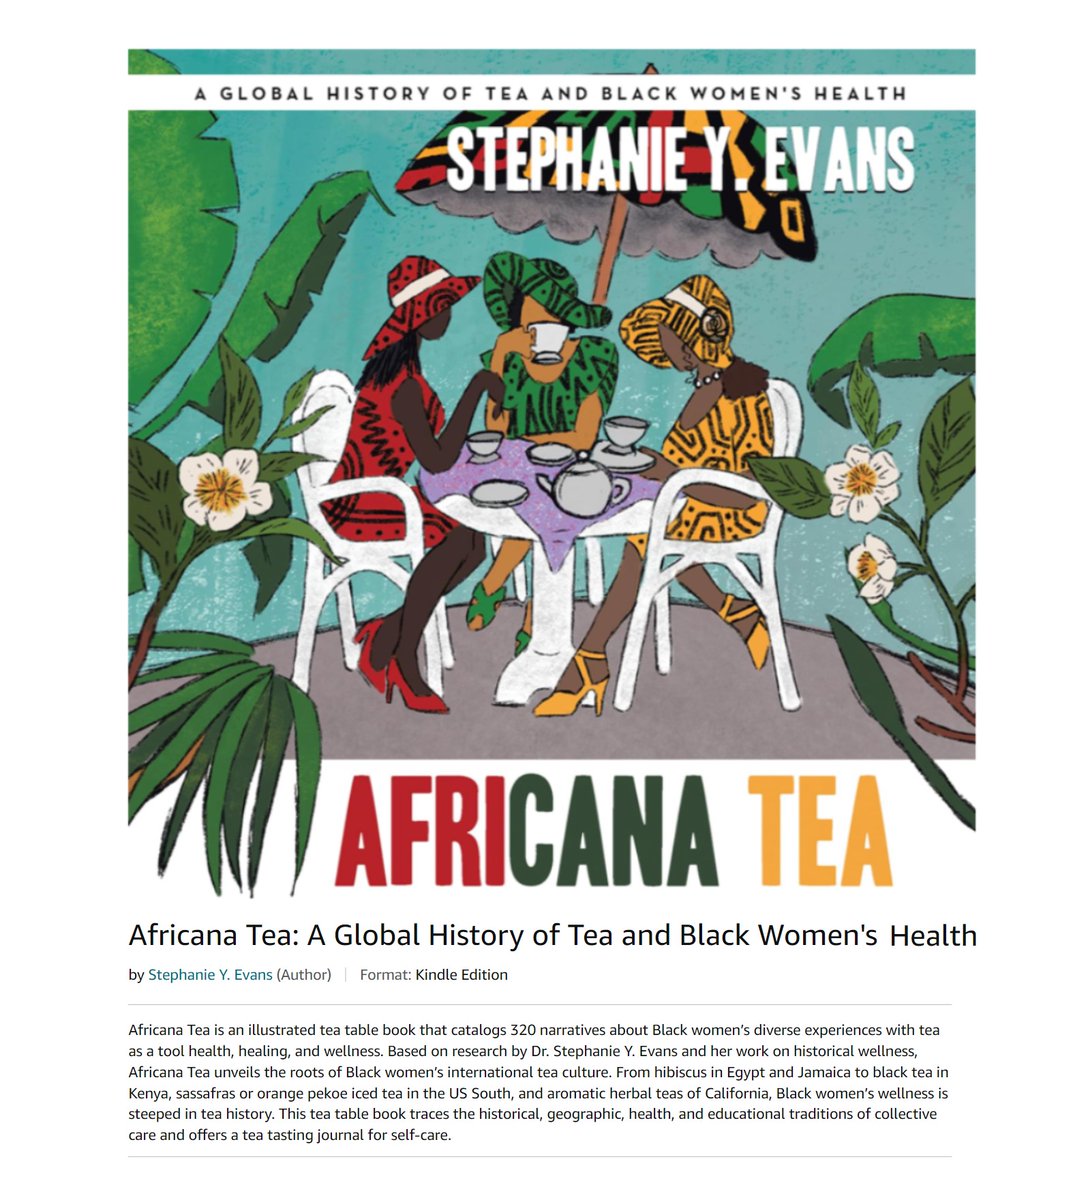 Africana Tea: A Global History of Tea and Black Women's Health. Illustrated e-book now available. Soon in paperback and hardcover. amazon.com/dp/B0CR9S237Z/… Africana Tea by Dr. Evans is a creative representation of research on tea traditions and Black women's historical wellness.